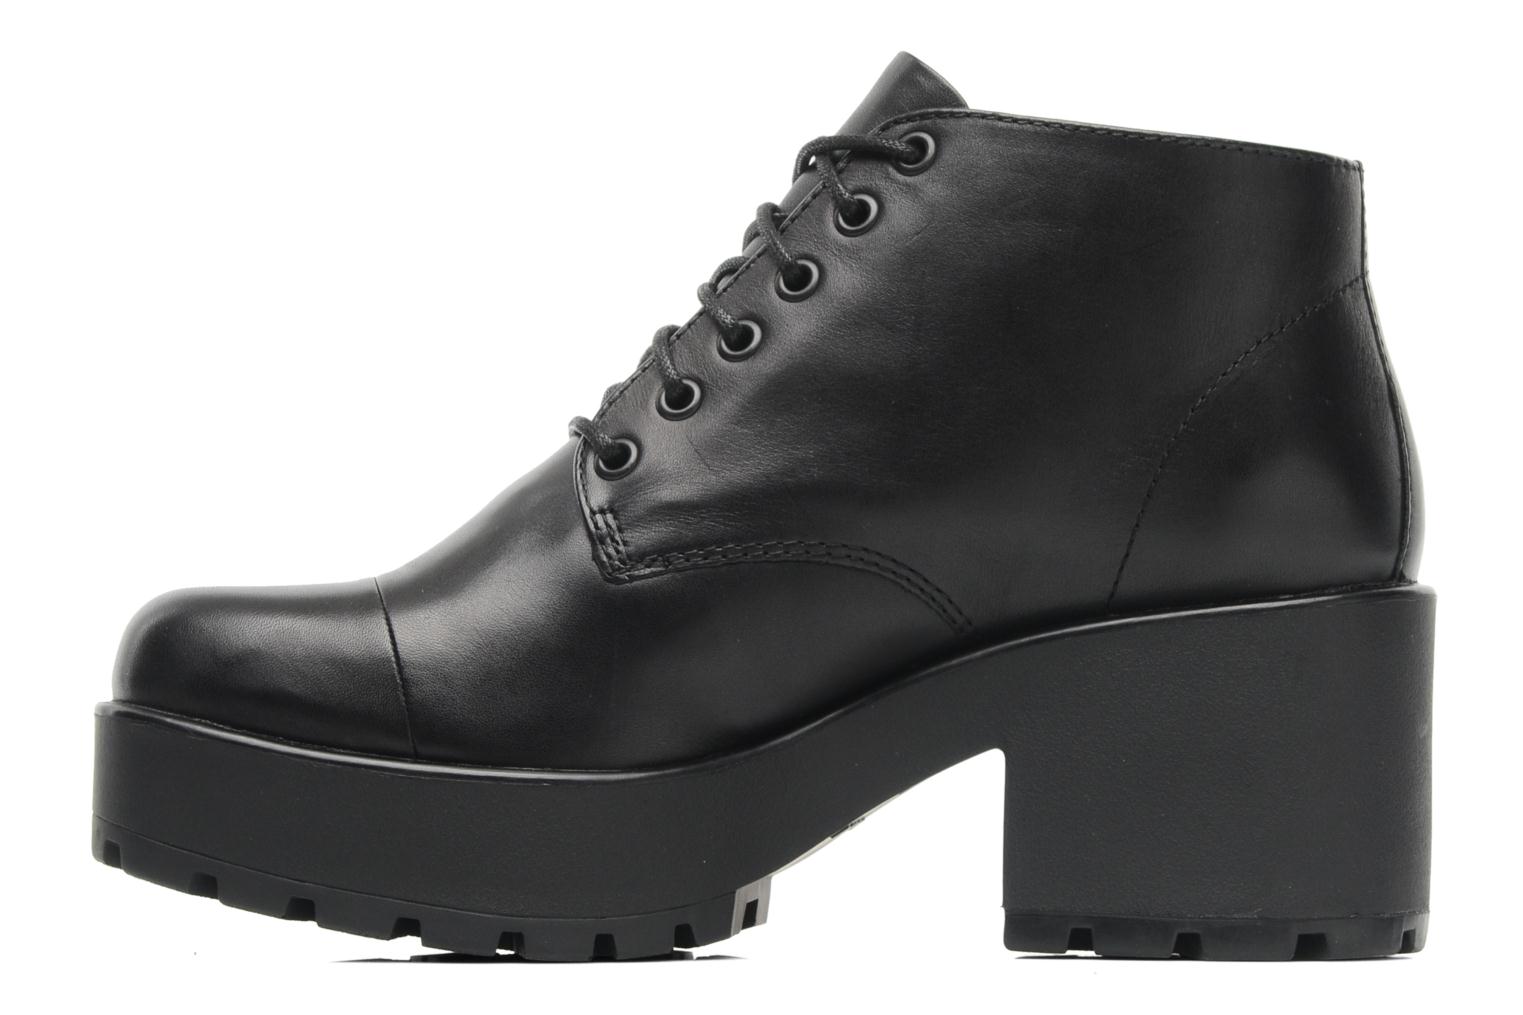 Vagabond Dioon 3747-001 Lace-up shoes in Black at Sarenza.co.uk (162265)